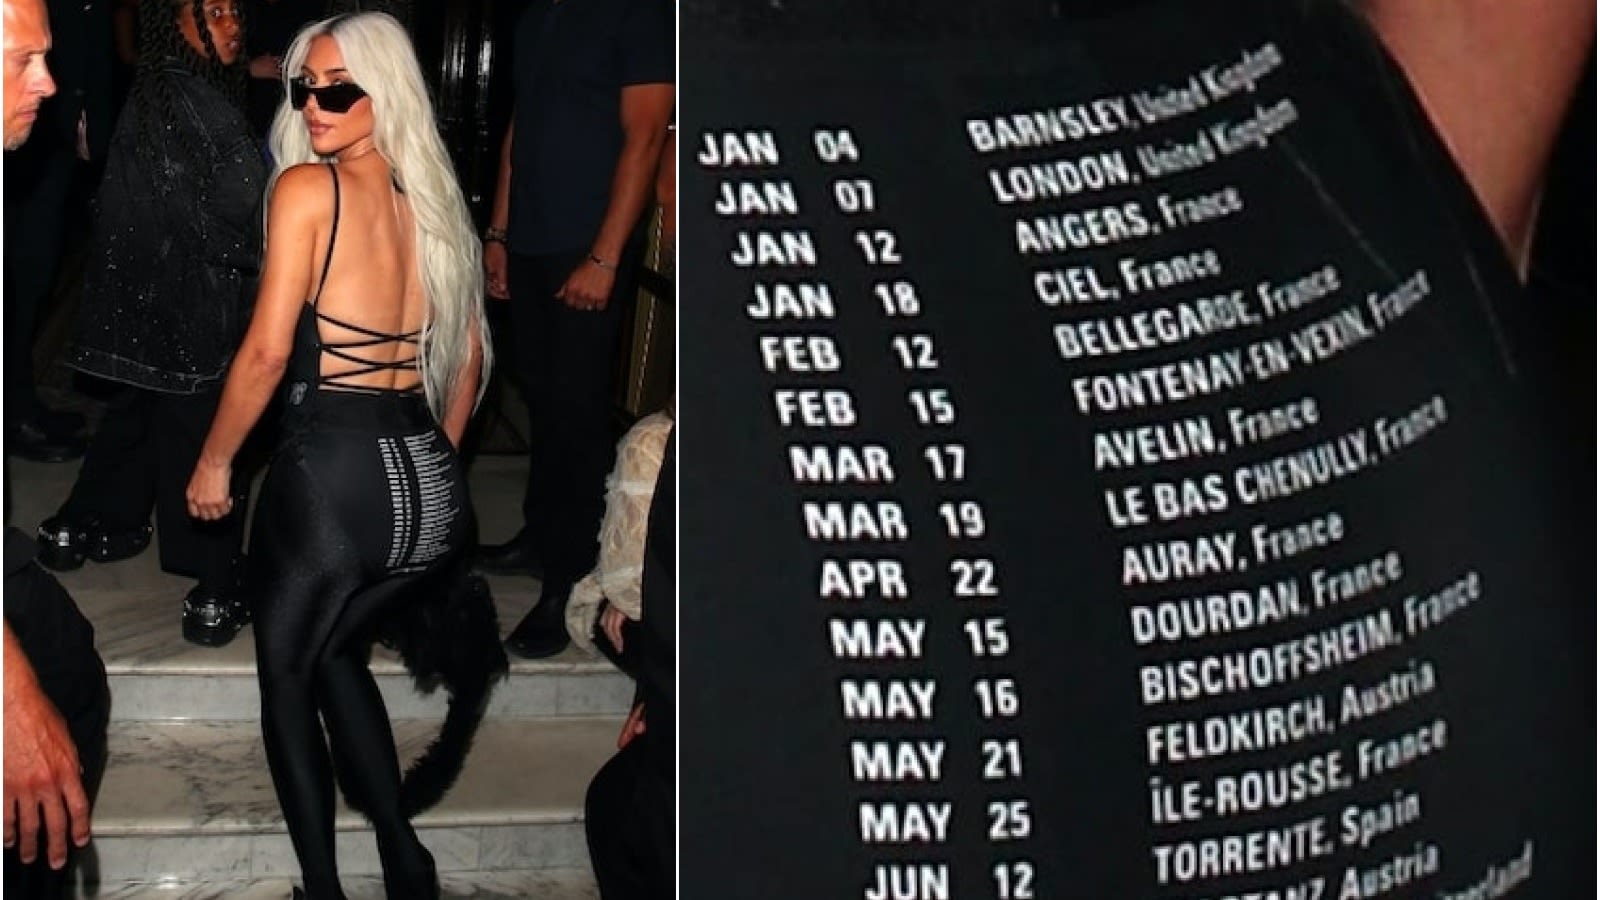 Kim Kardashian thanked for 'putting Barnsley on the map' with branded  bodysuit